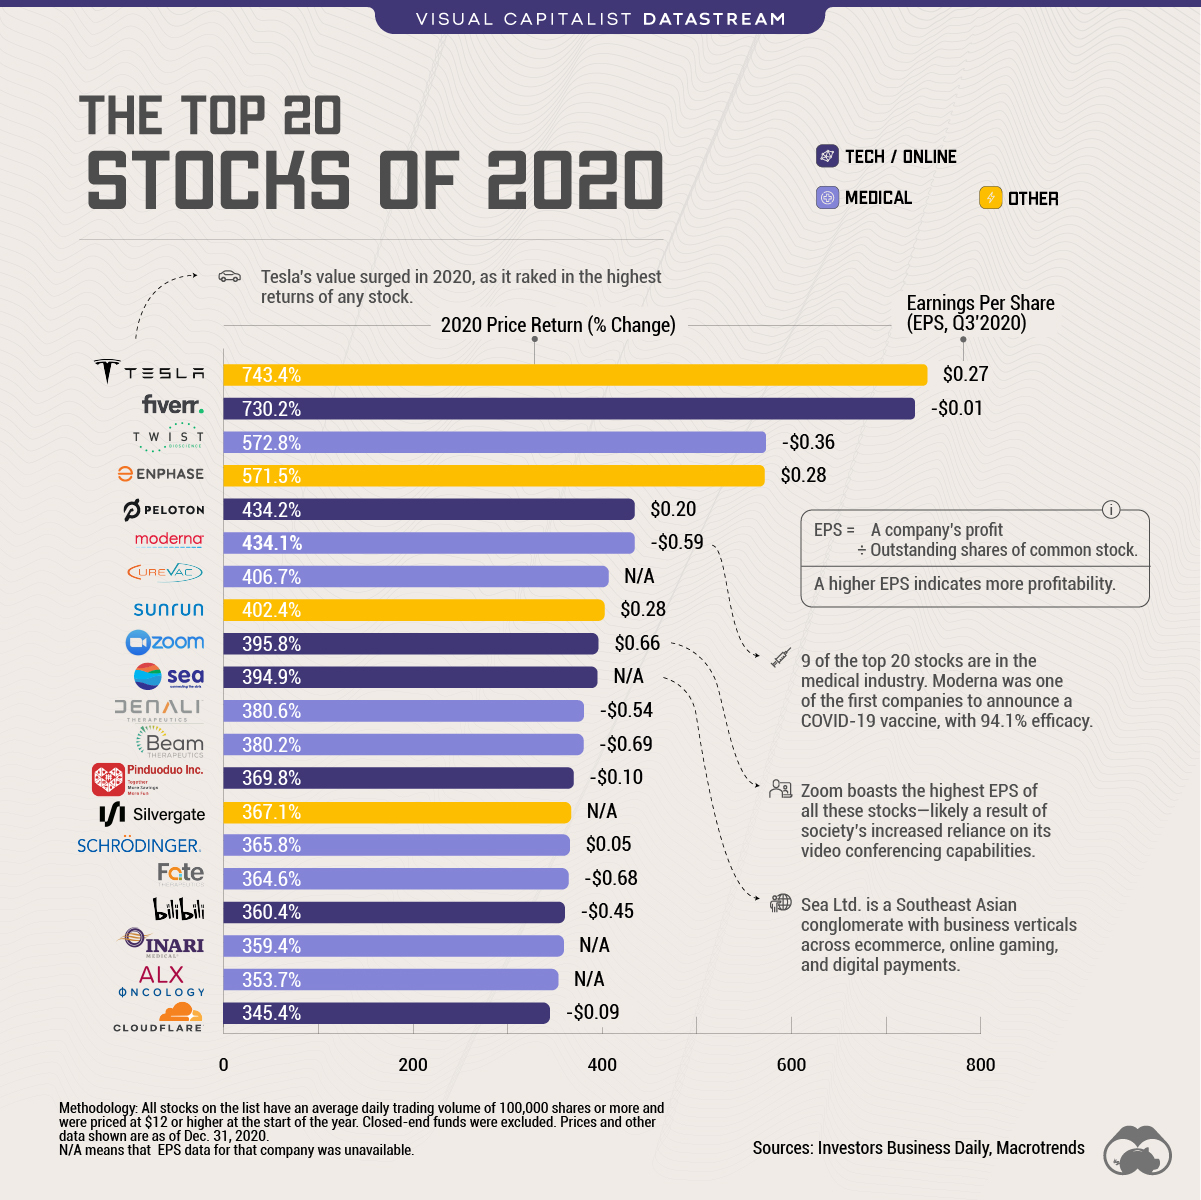 Chart The 20 Top Stocks of 2020, by Price Return and EPS